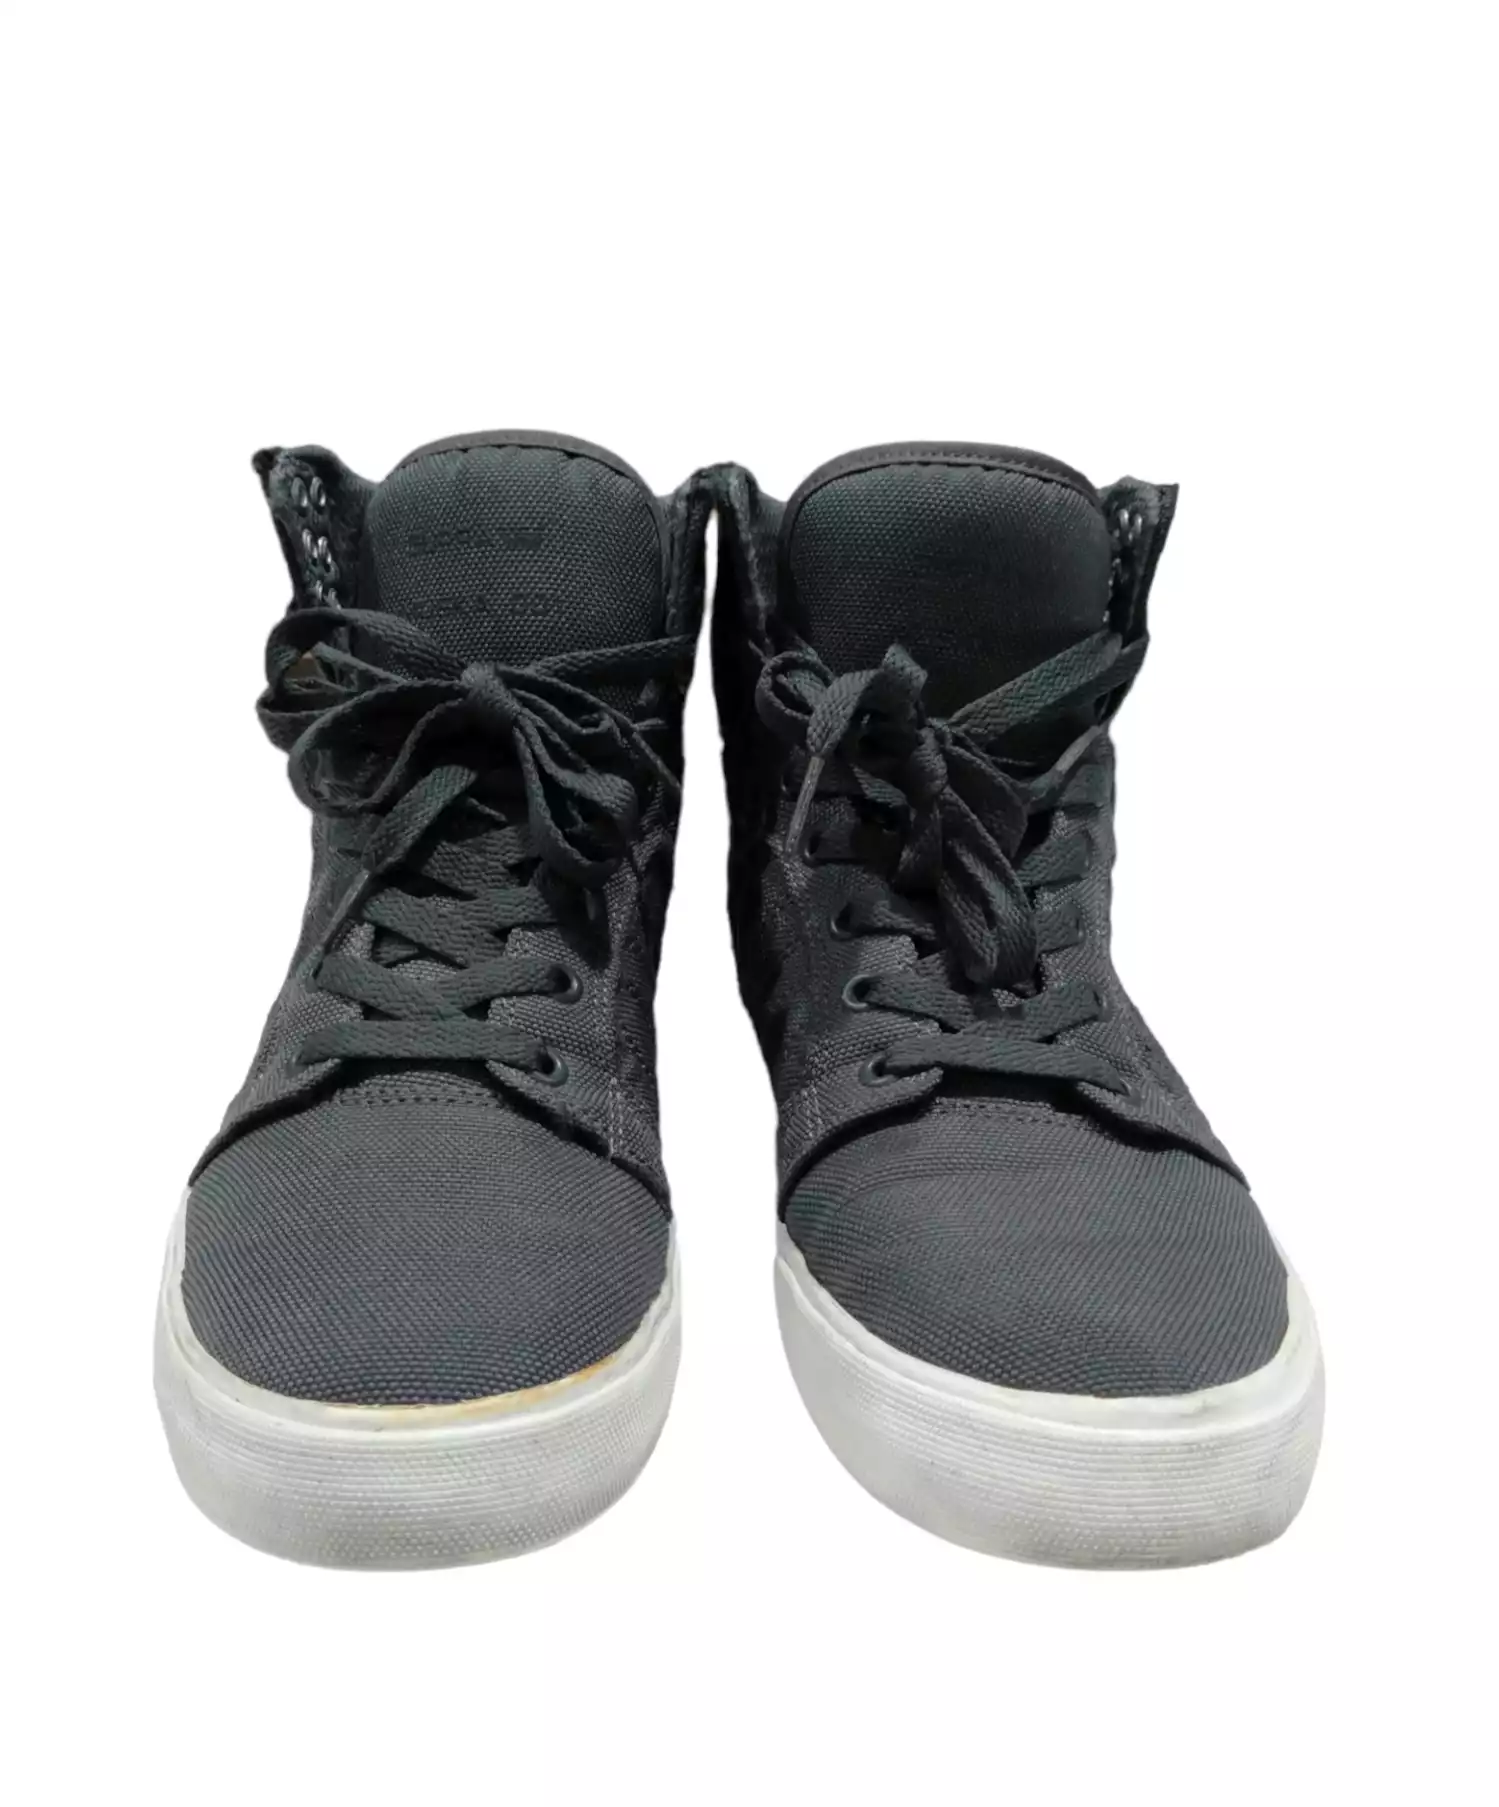 Shoes by Supra